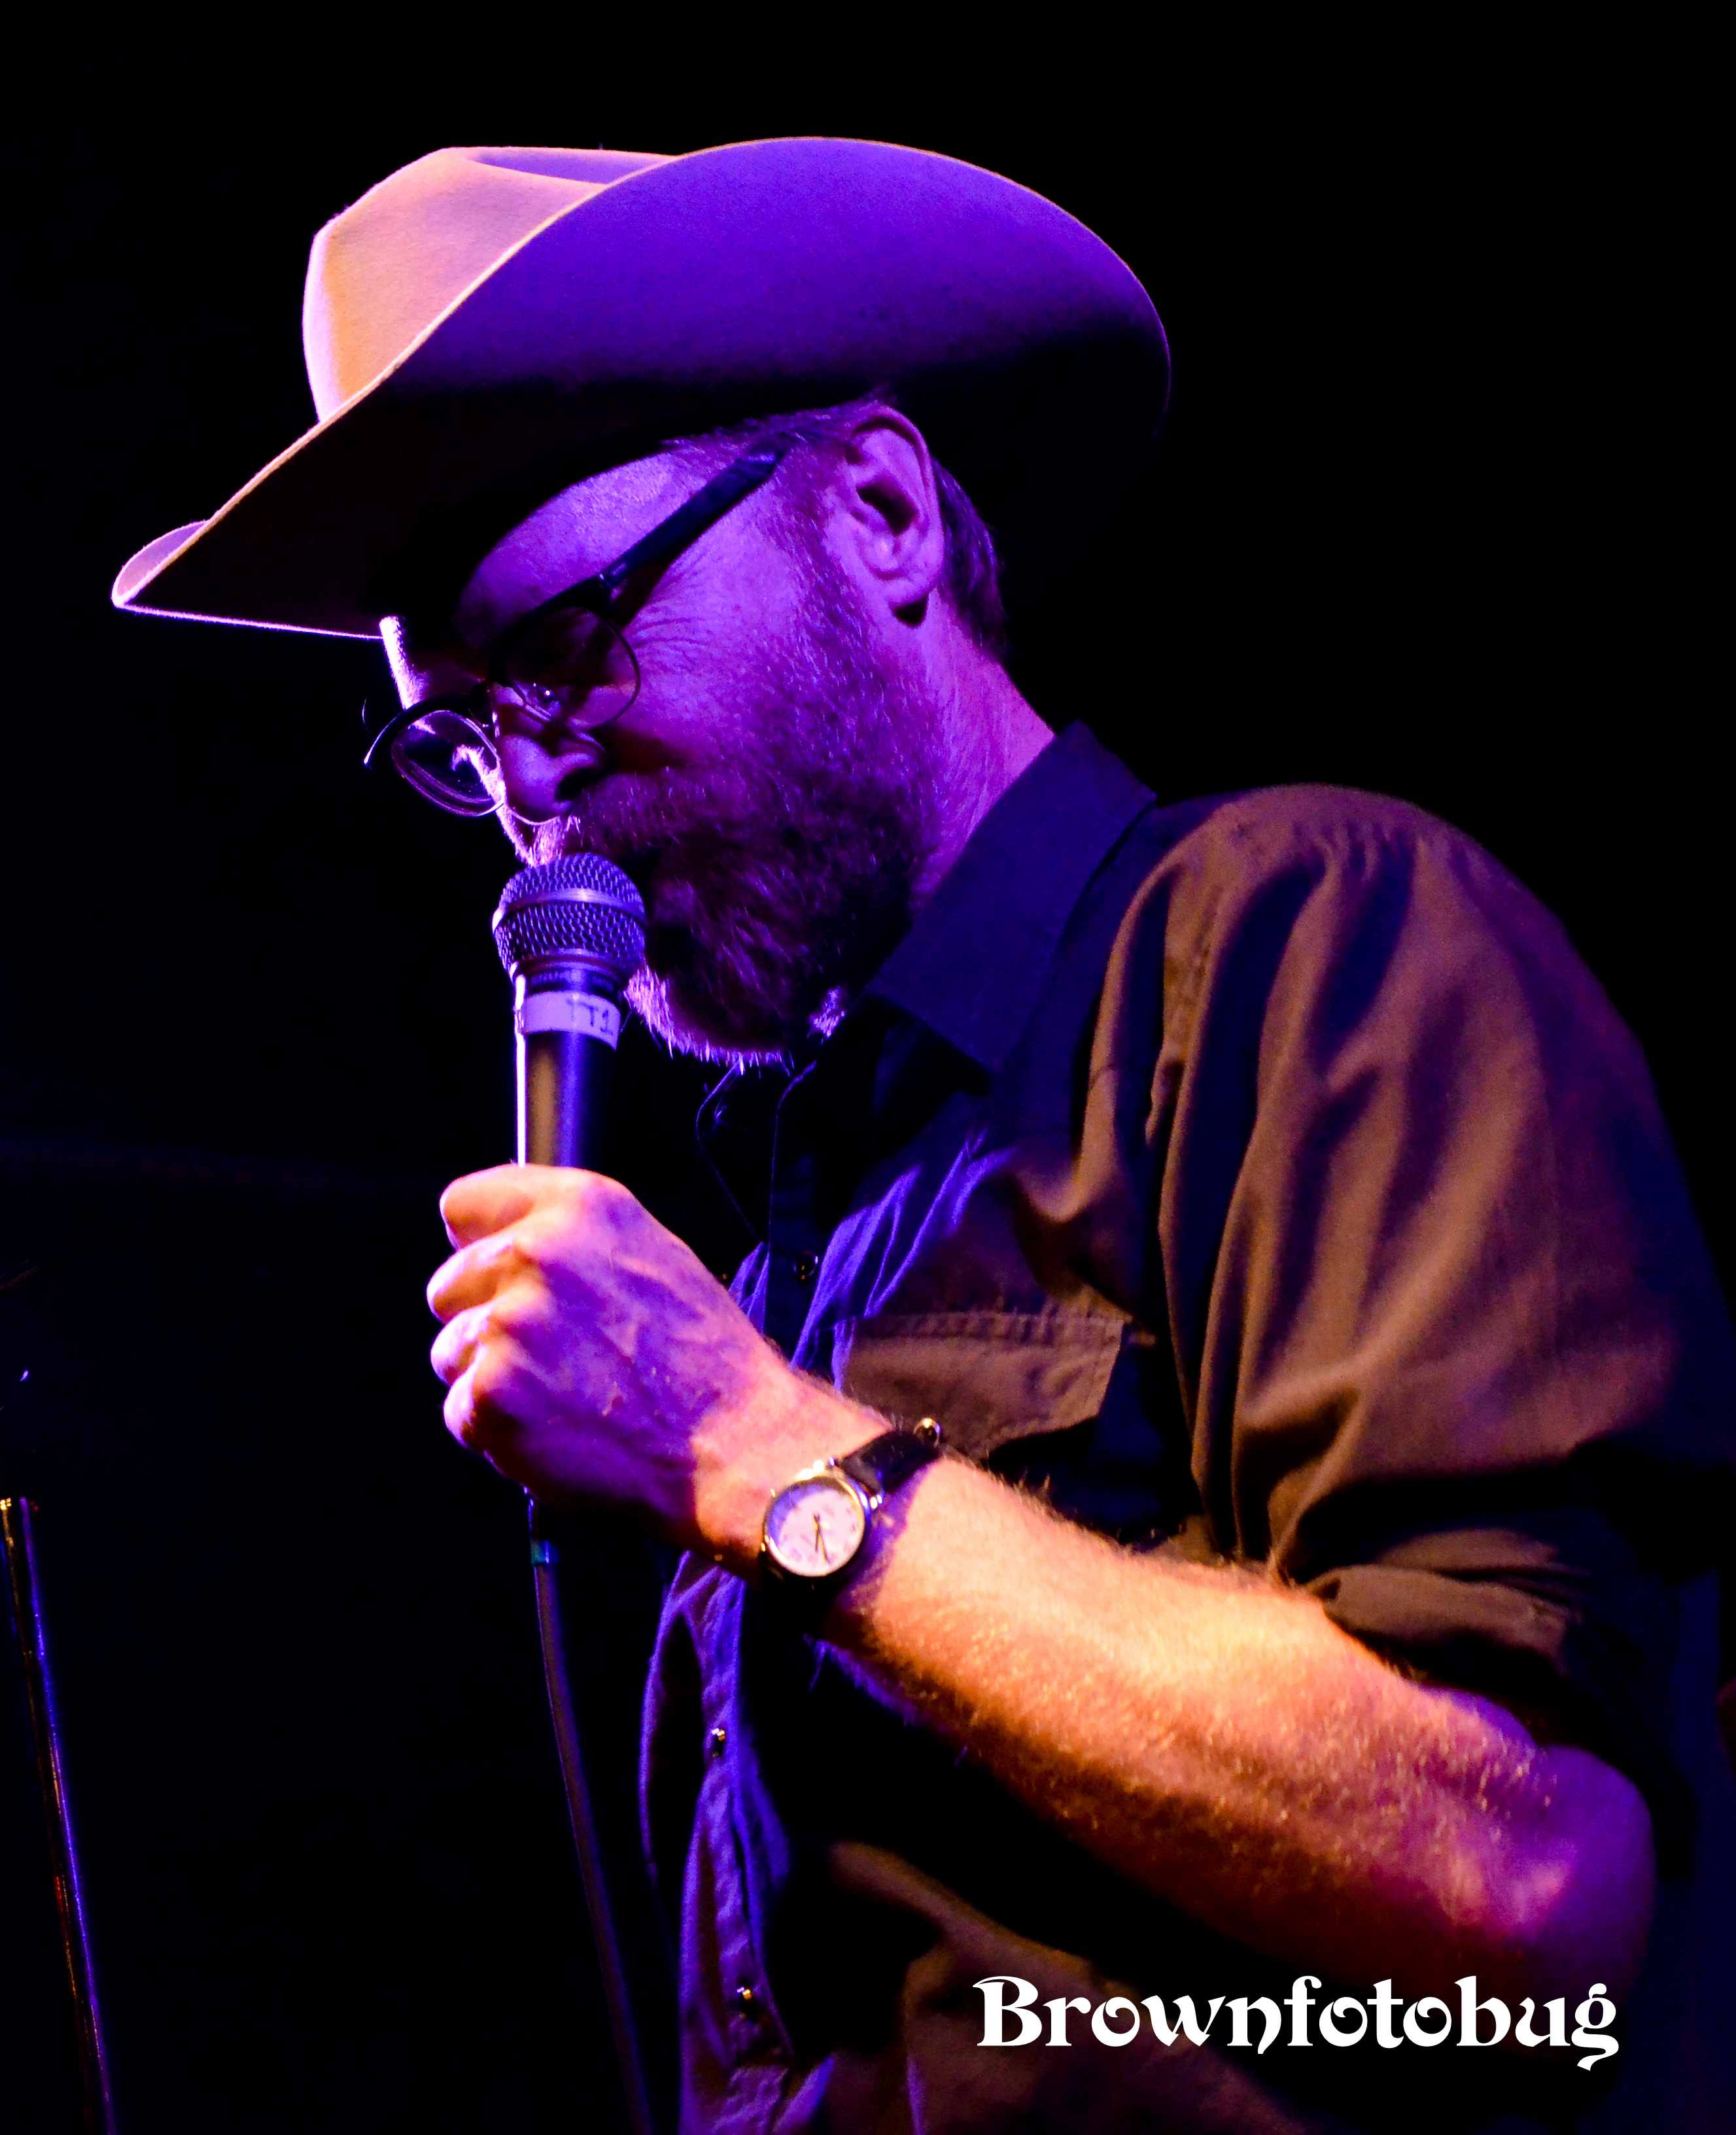 Slim Cessna’s Auto Club at the Tractor Tavern (Photo by Arlene Brown)